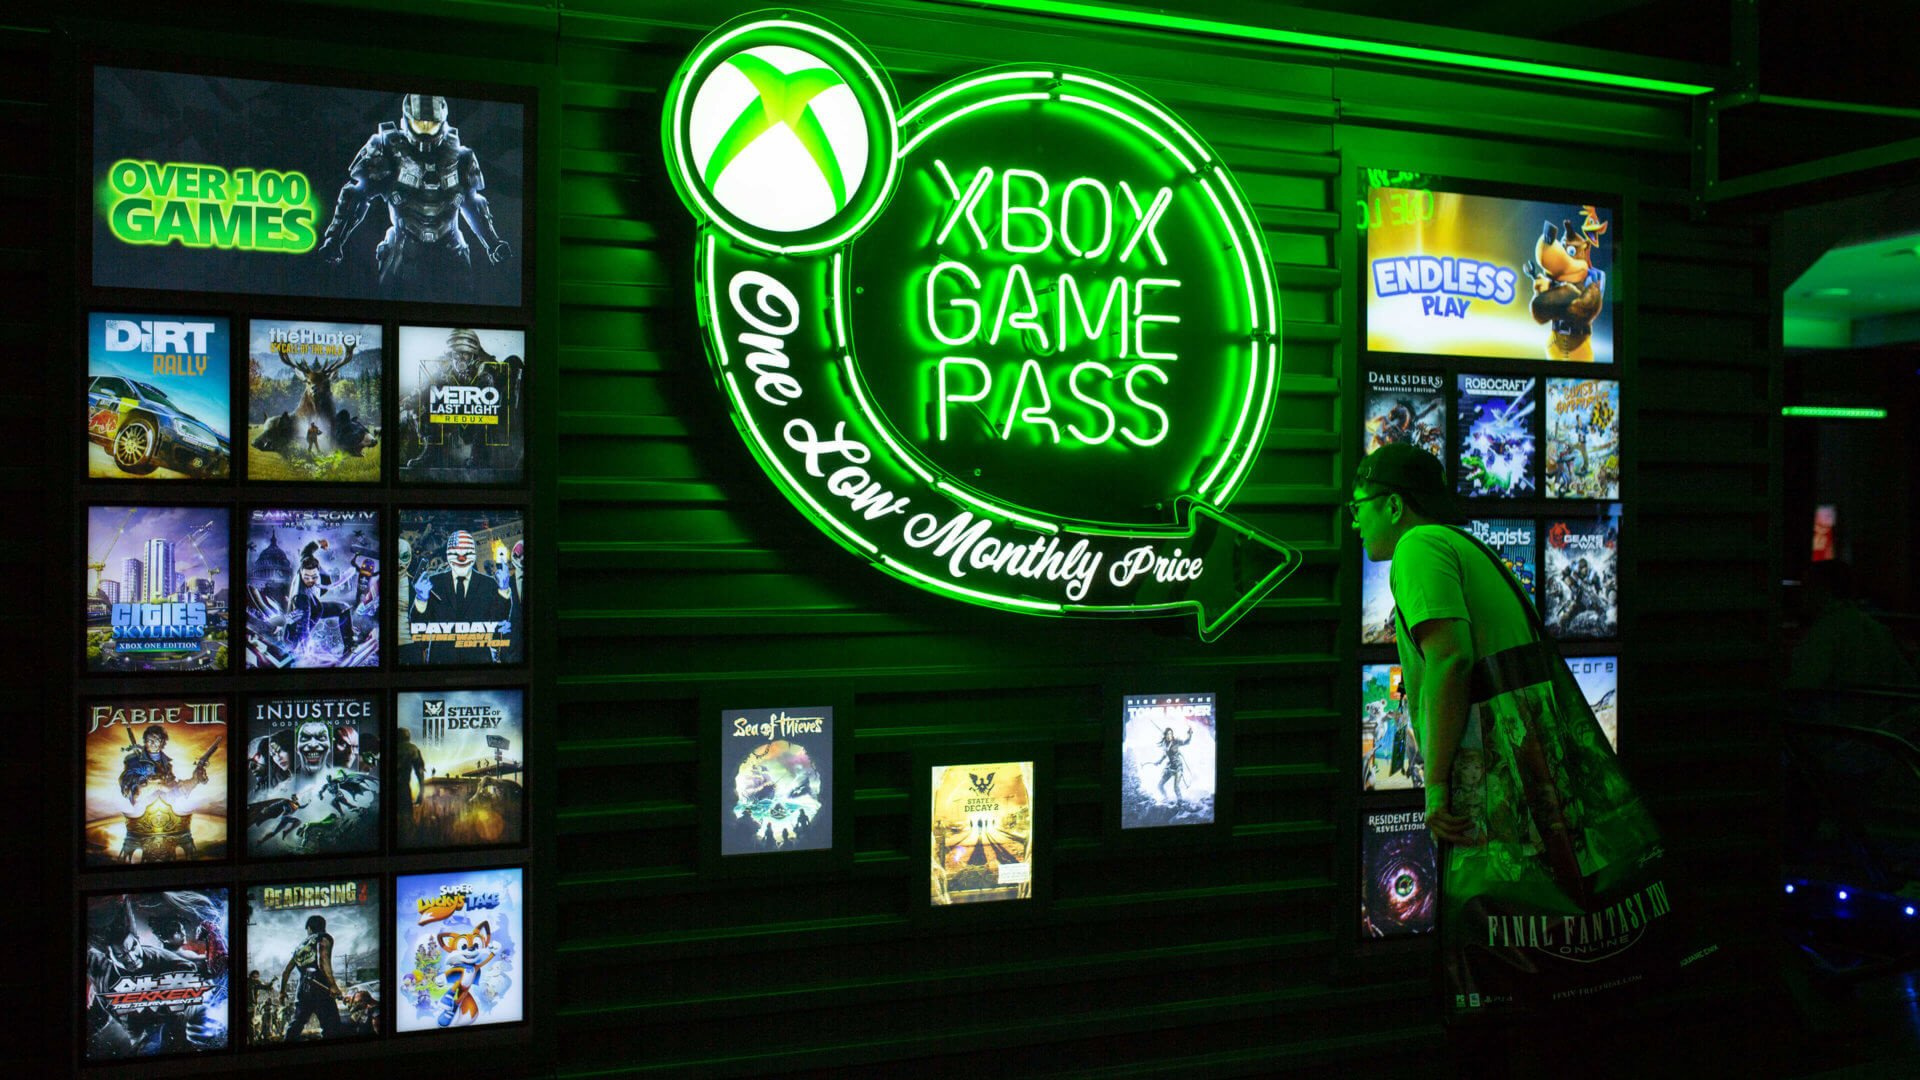 is red dead redemption 2 going to be on xbox game pass